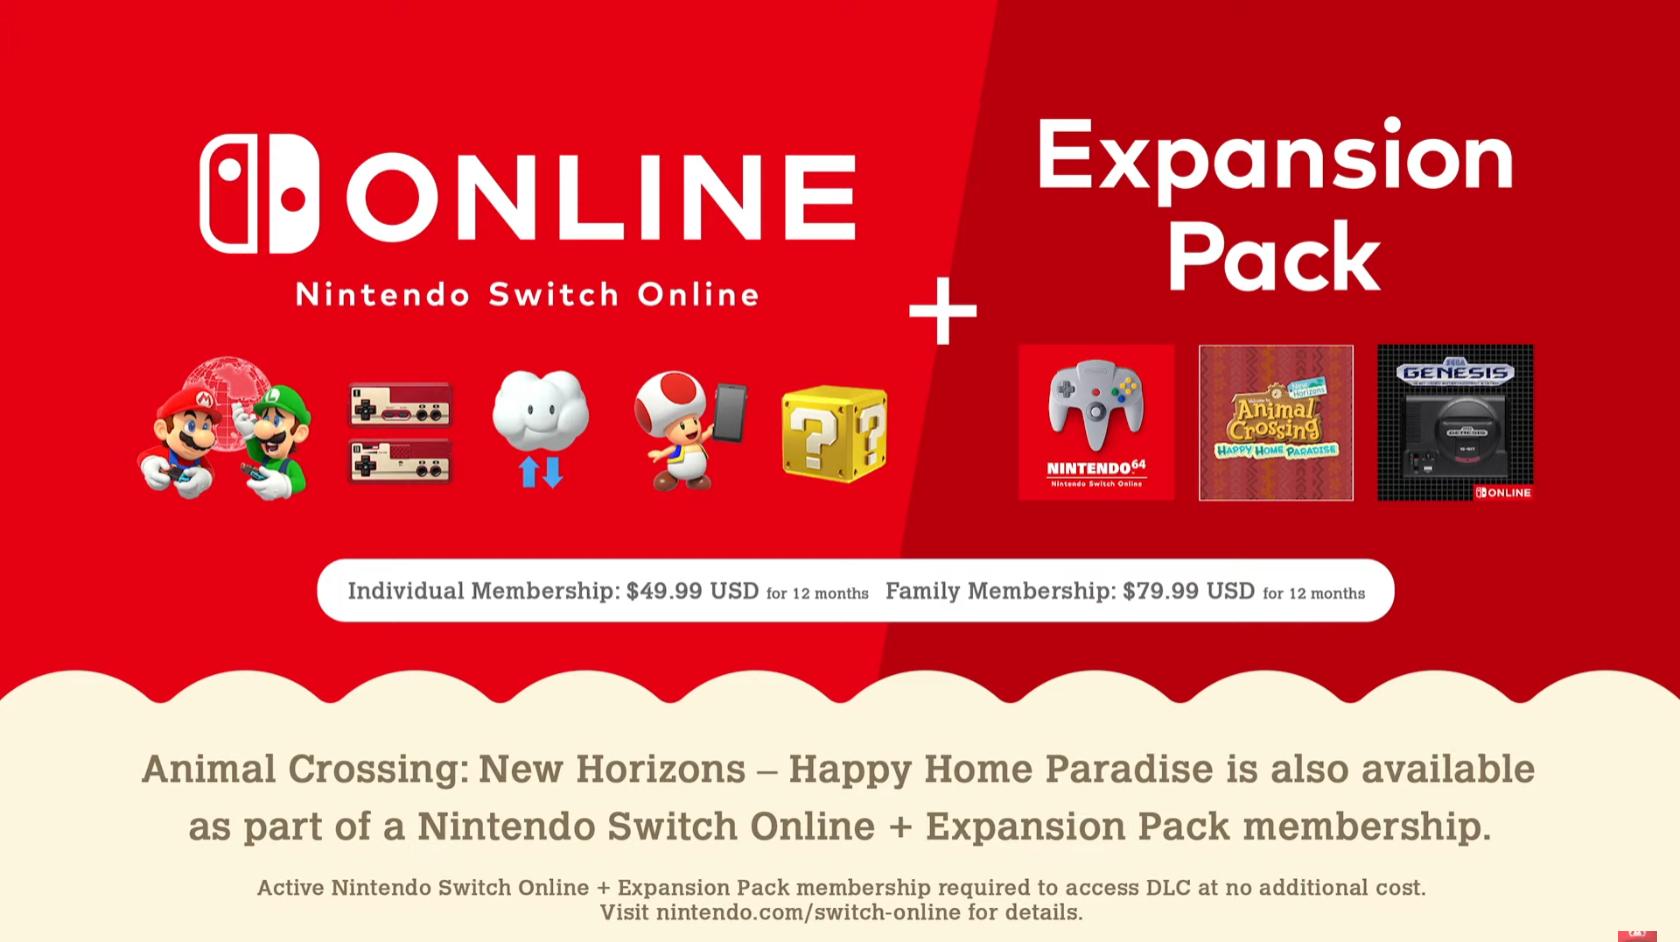 Nintendo Switch Online Expansion Pack Info